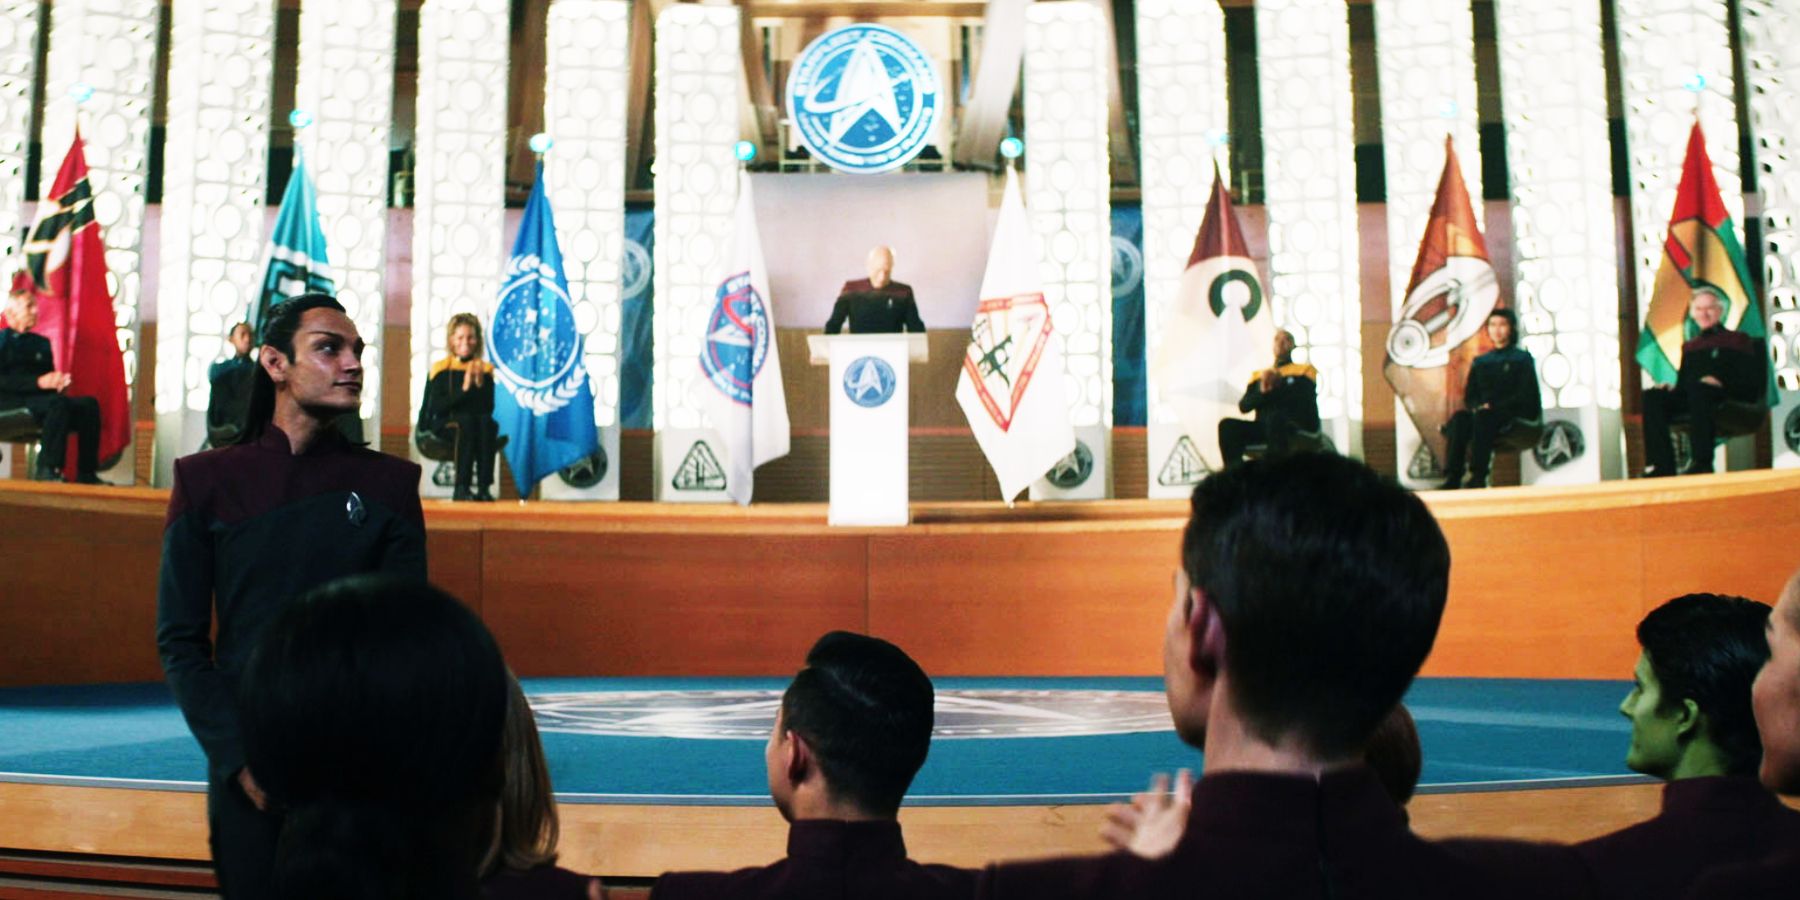 A student receives applause at a graduation ceremony, with various flags on display behind them